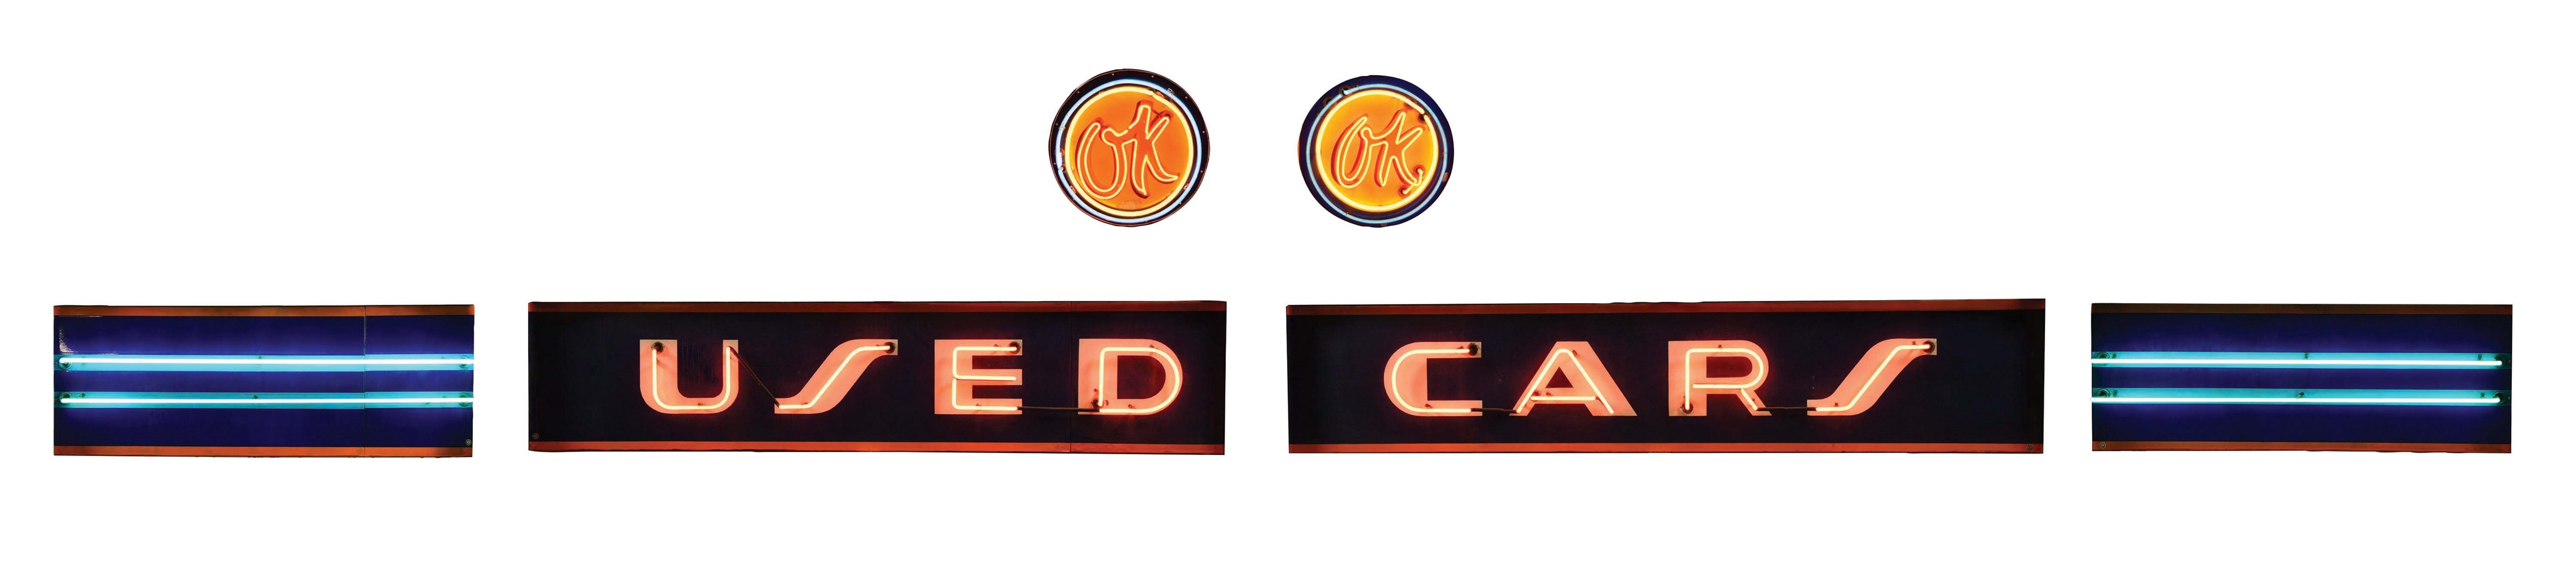 LARGE & OUTSTANDING SIX PIECE PORCELAIN OK USED CARS NEON STRIP SIGN W/ OK USED CAR NEON TOPPER SIGNS. 